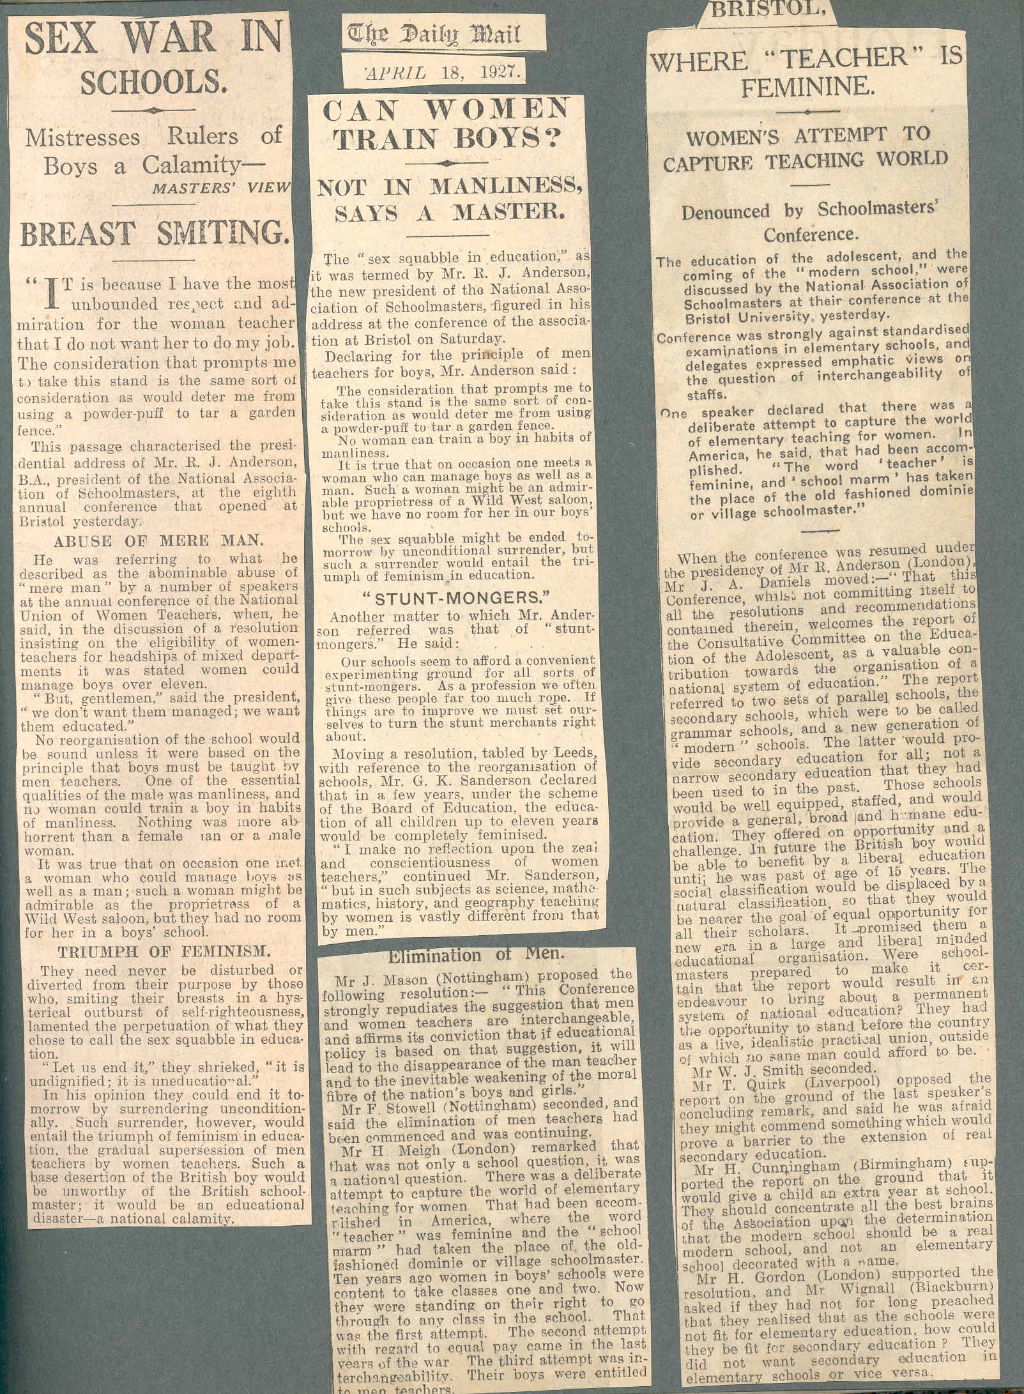 Newspaper cuttings reporting on objections to women teachers